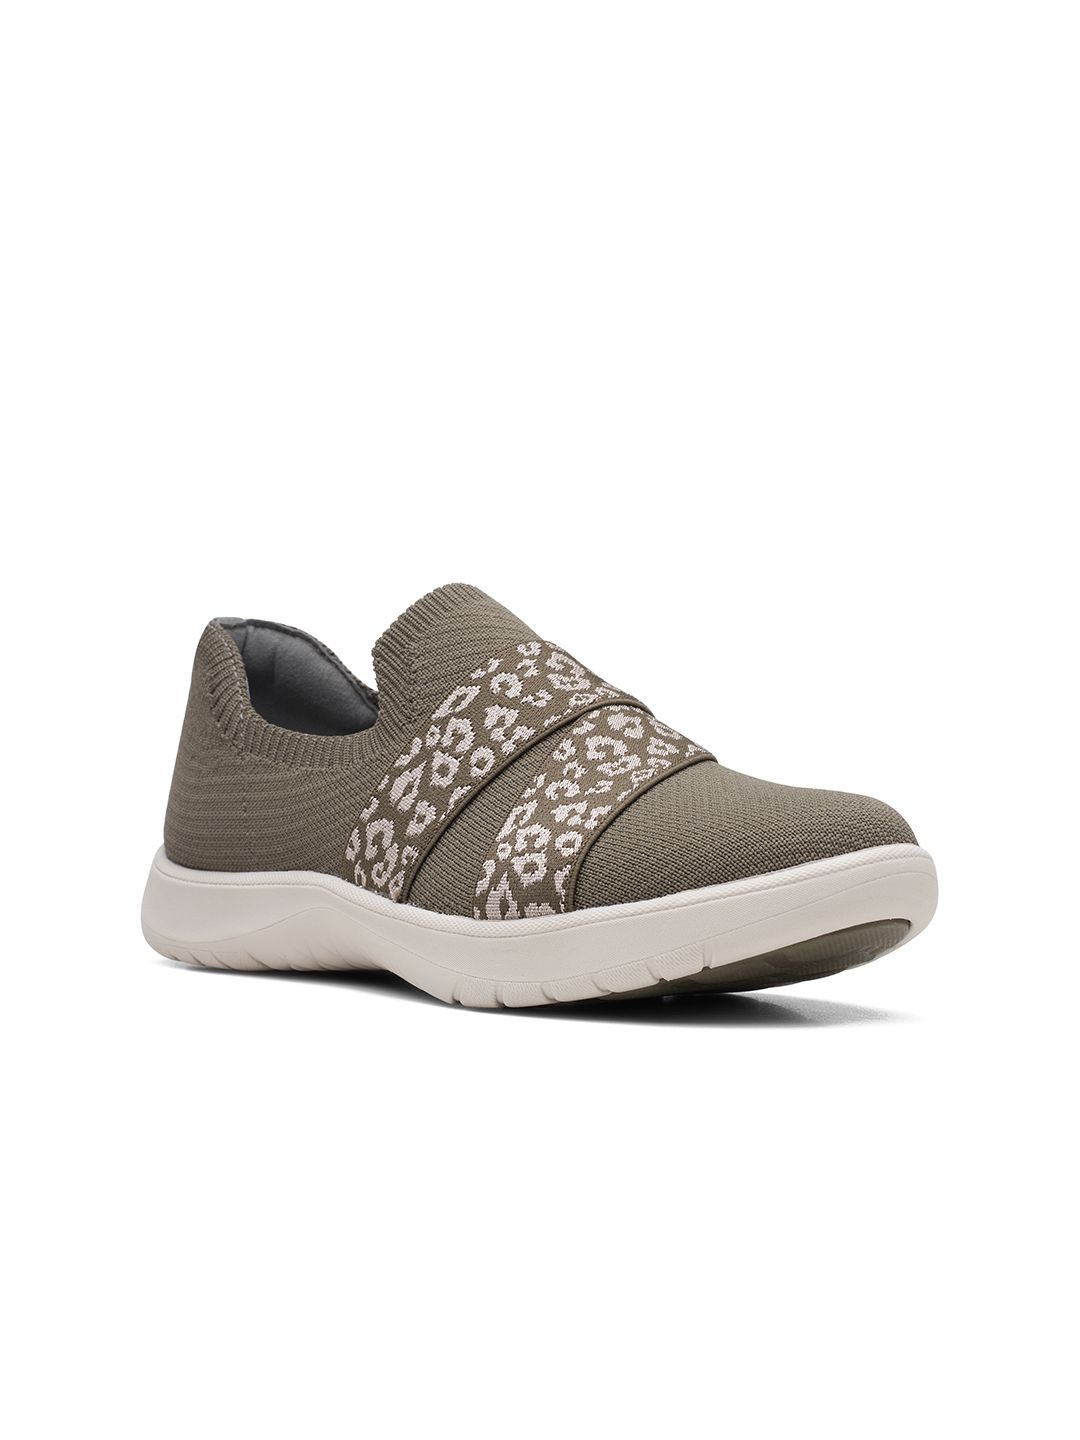 Clarks Women Olive Green Textured Slip-On Sneakers Price in India